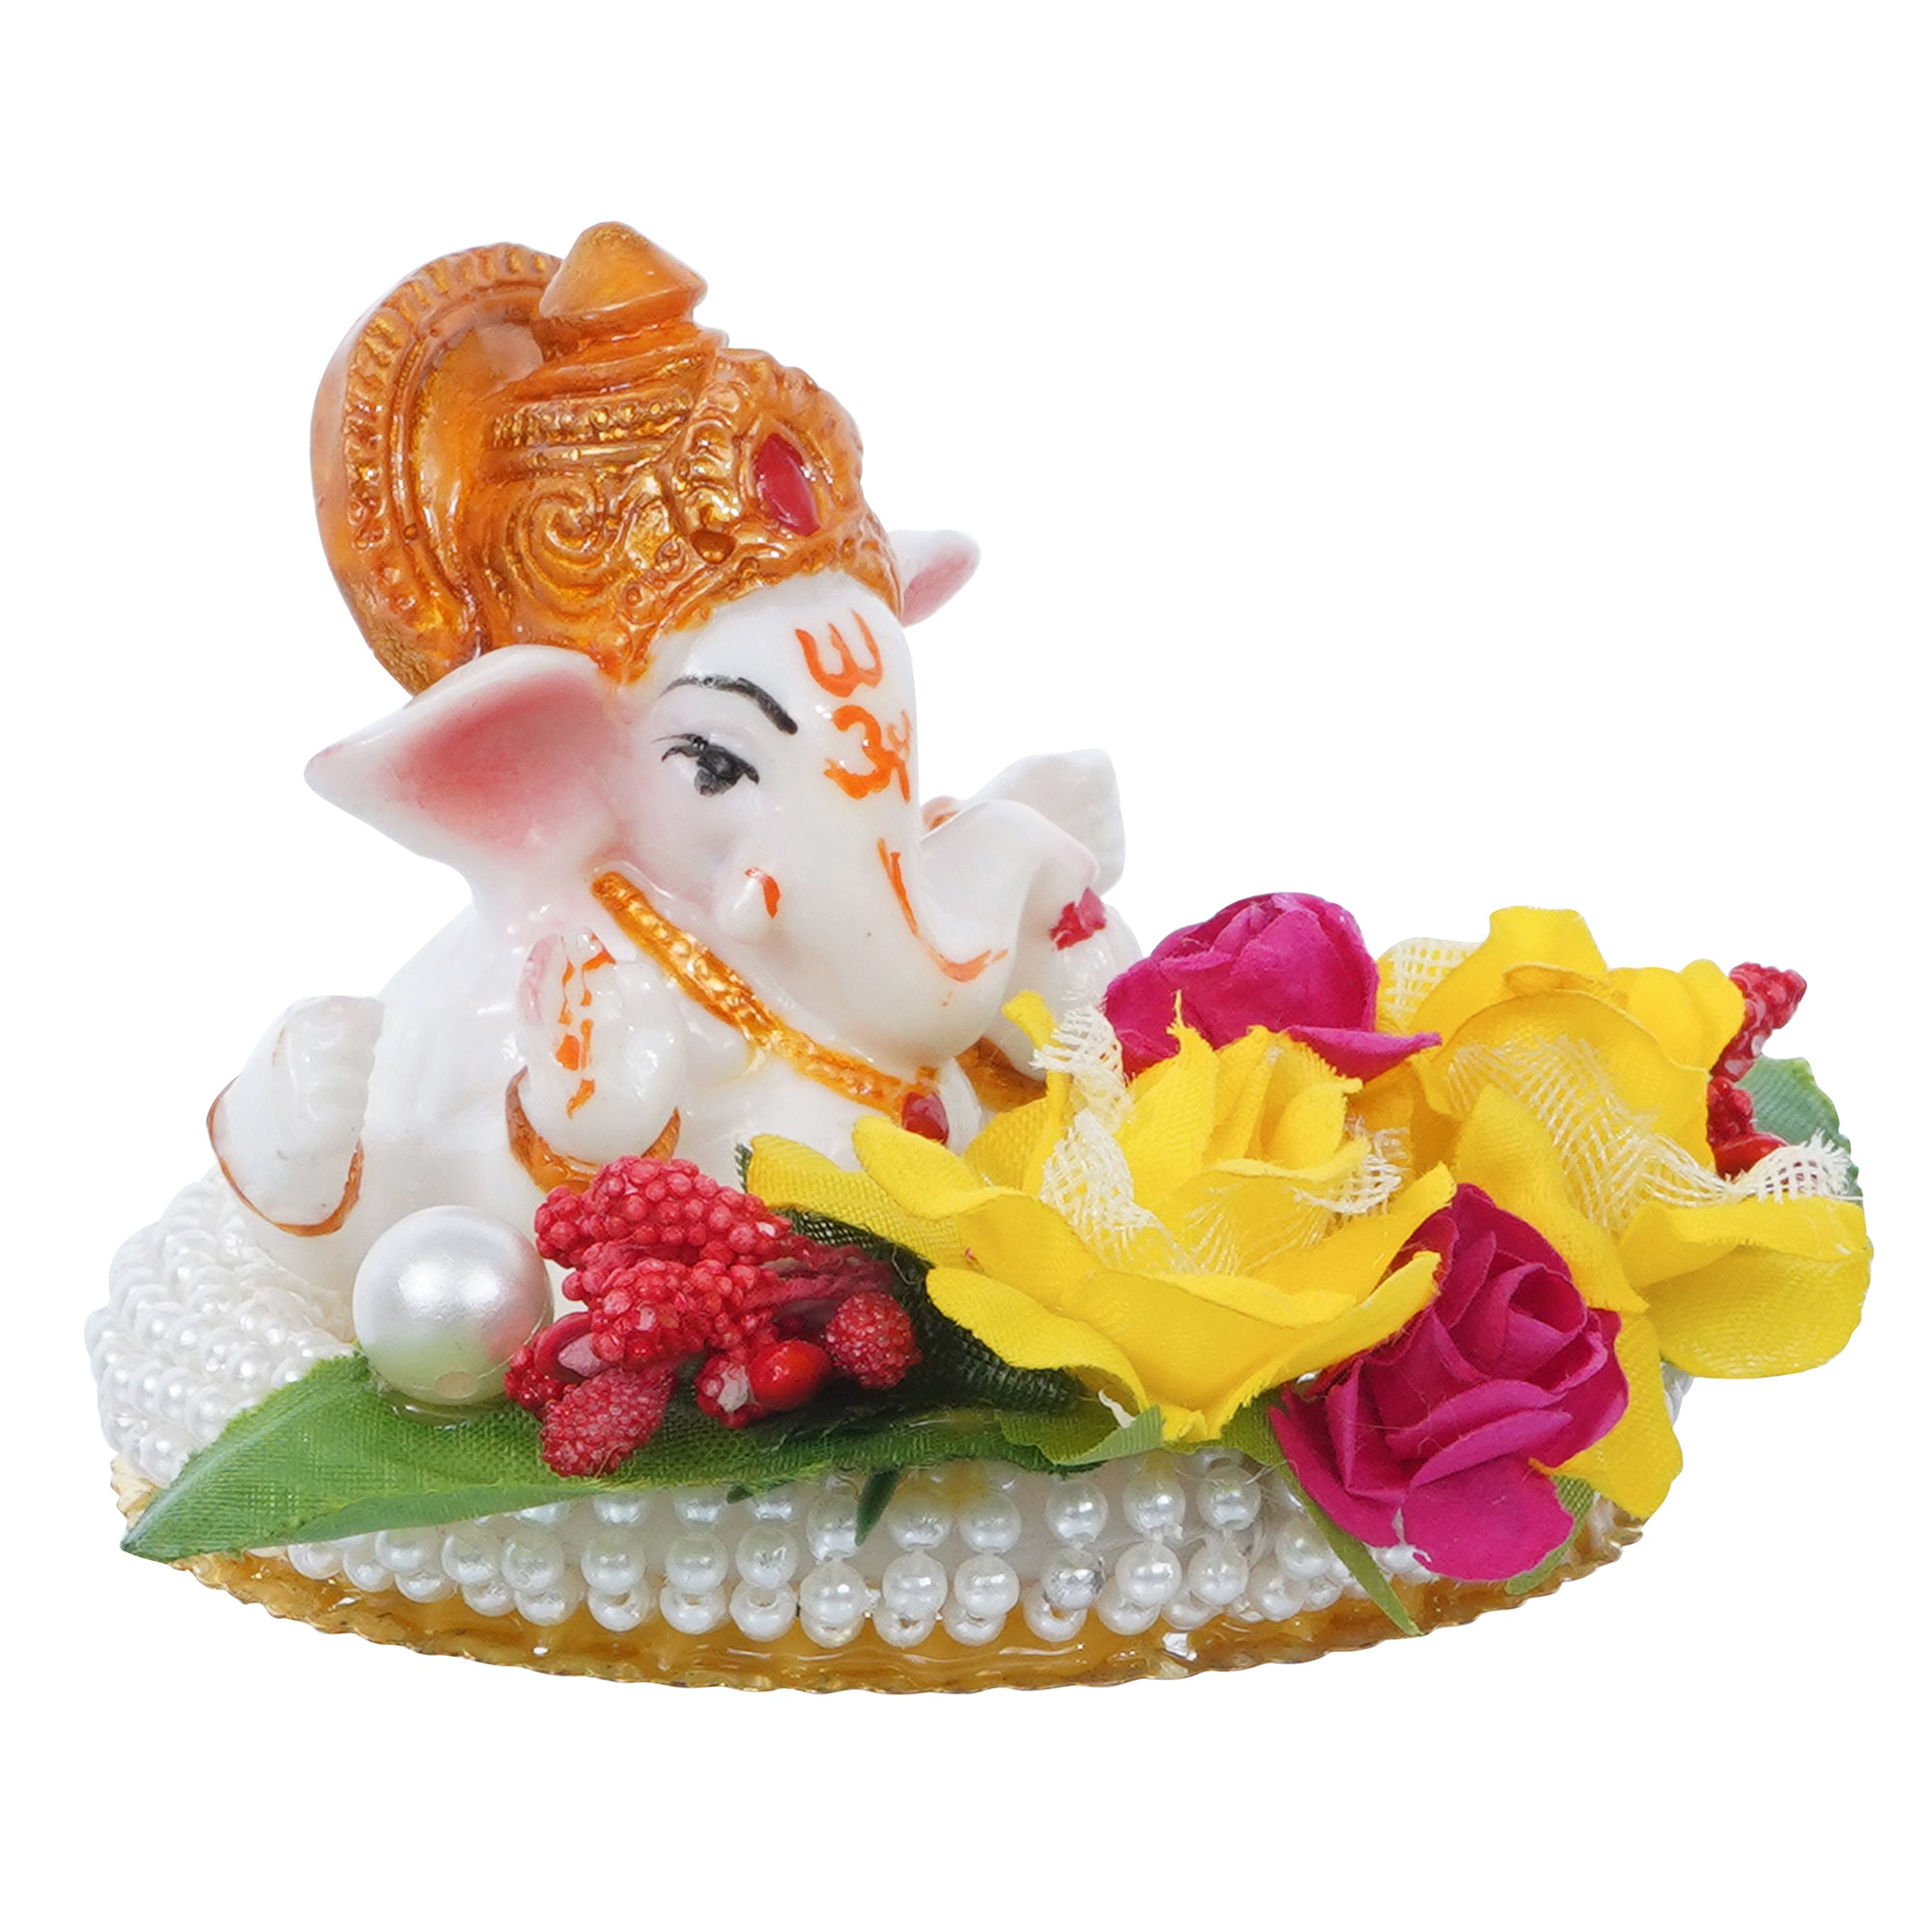 Lord Ganesha Idol on Decorative Handcrafted Plate with Colorful Flowers and Leaf 4